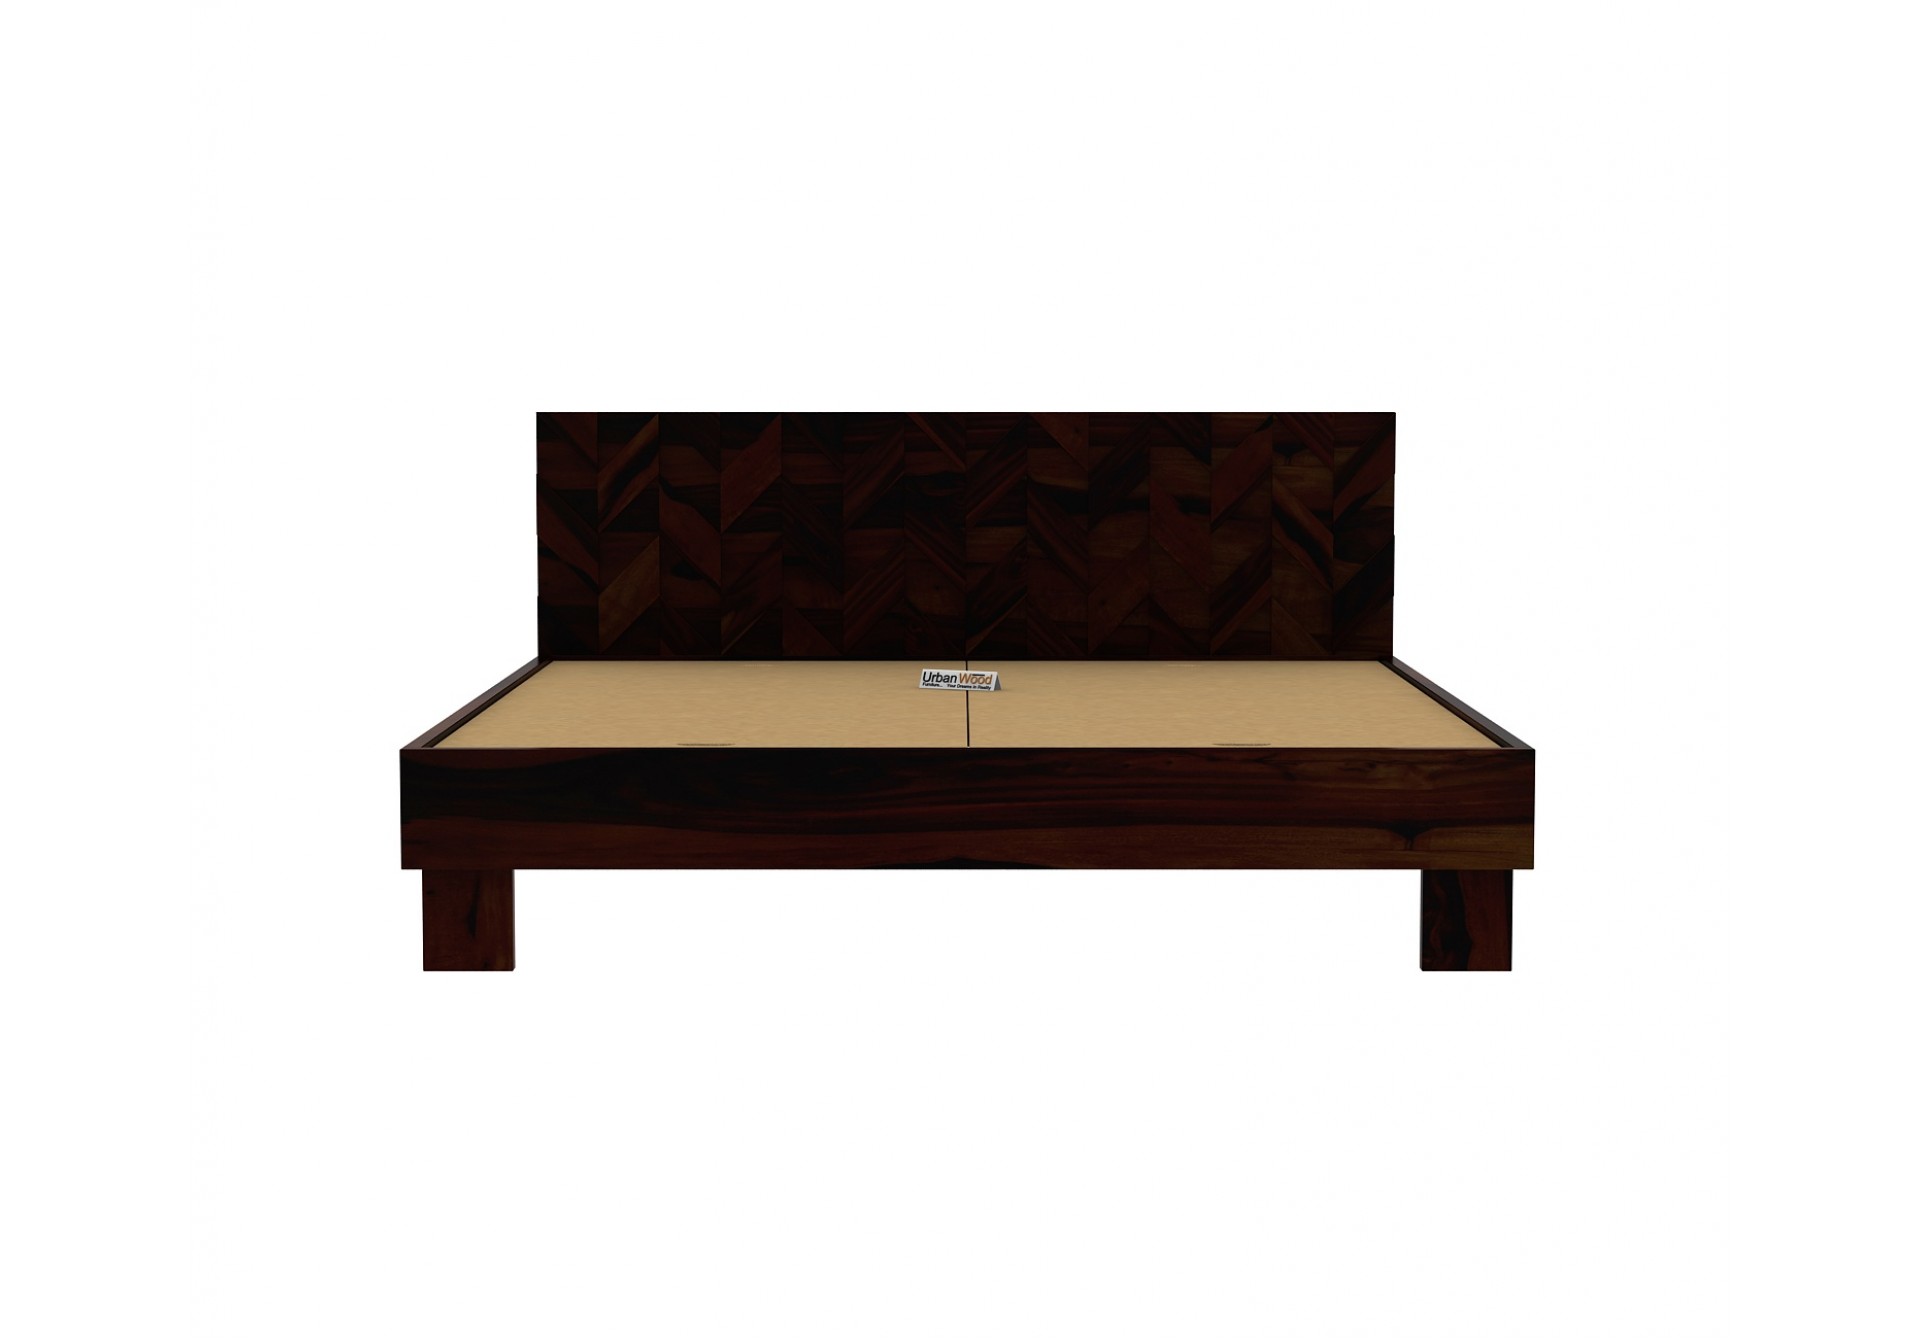 Trace Bed Without Storage ( Queen Size, Walnut Finish )